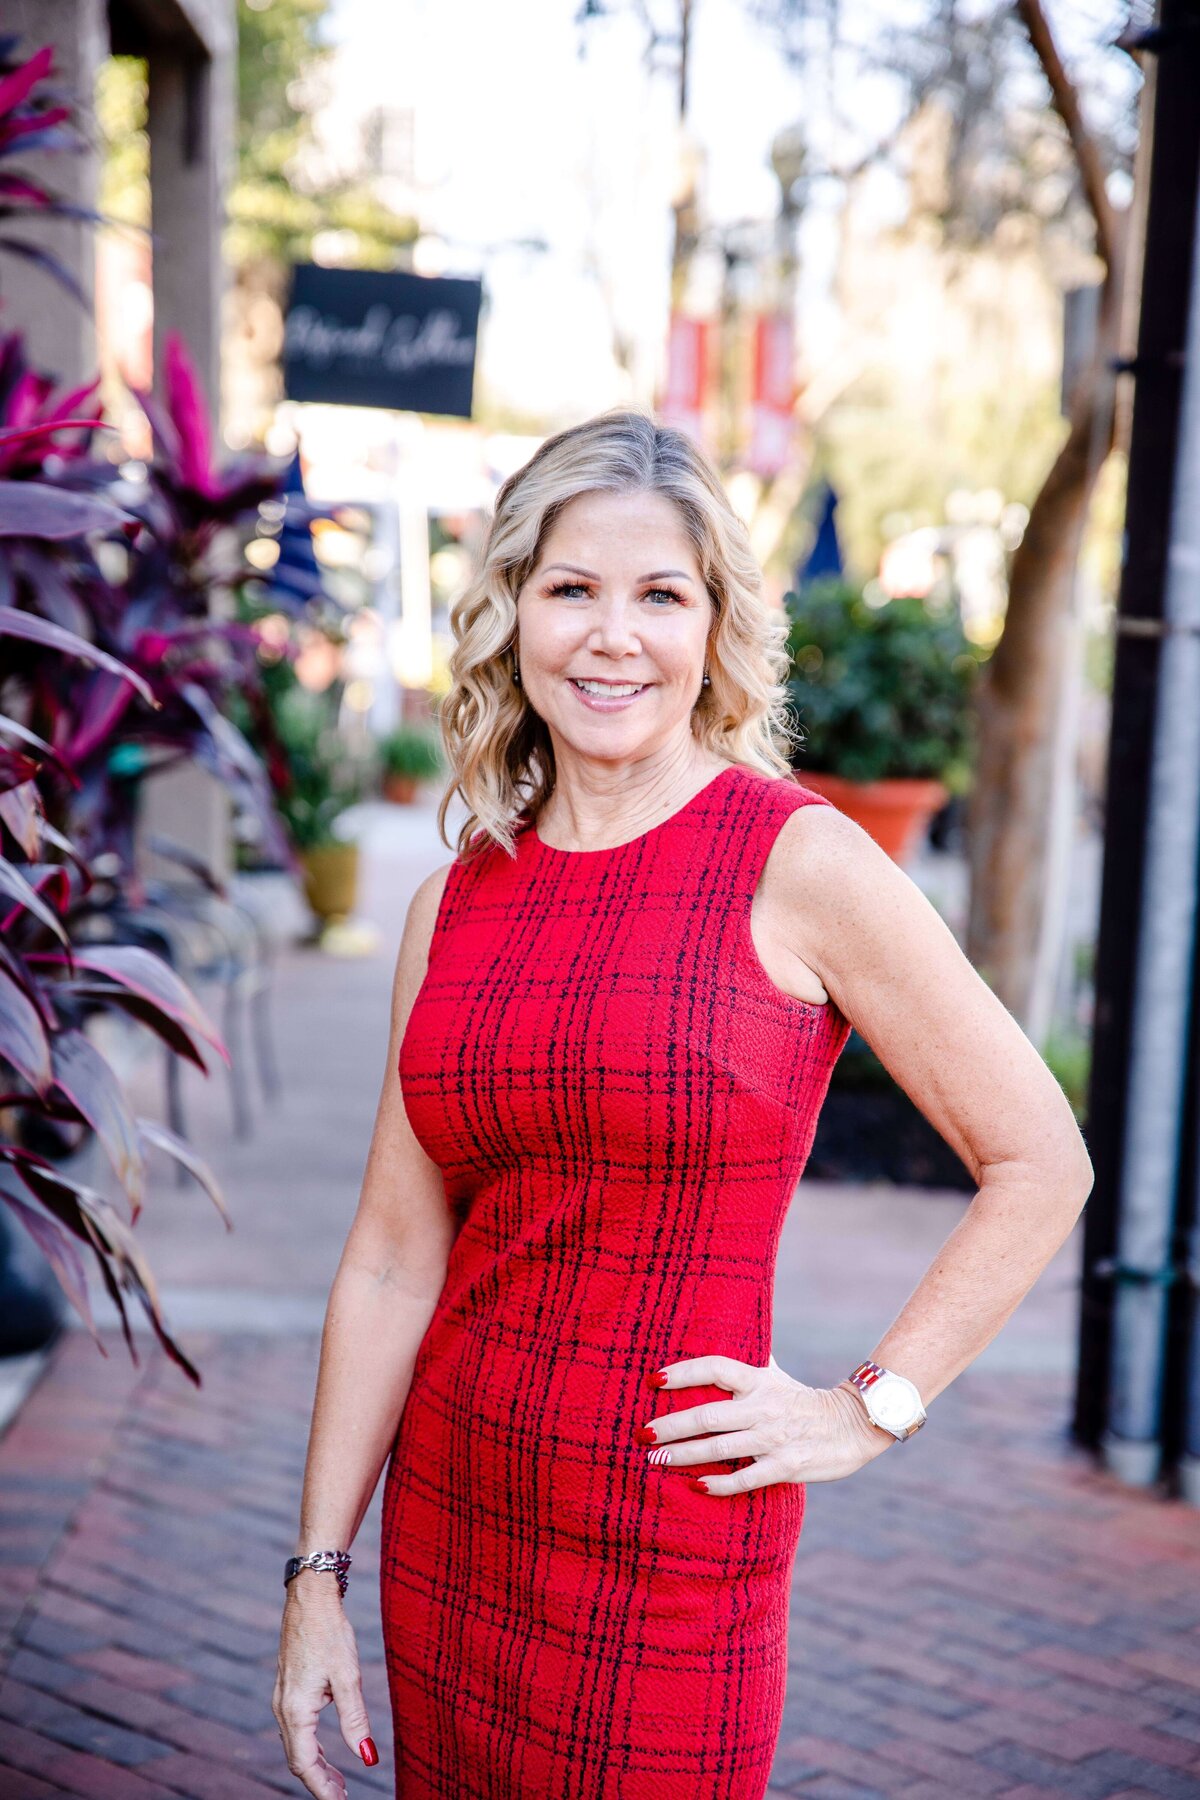 Business headshot of women in a red dress with one hand on her hip smiling while standing on a brick sidewalk downtown for a brand photo shoot with commercial photographers